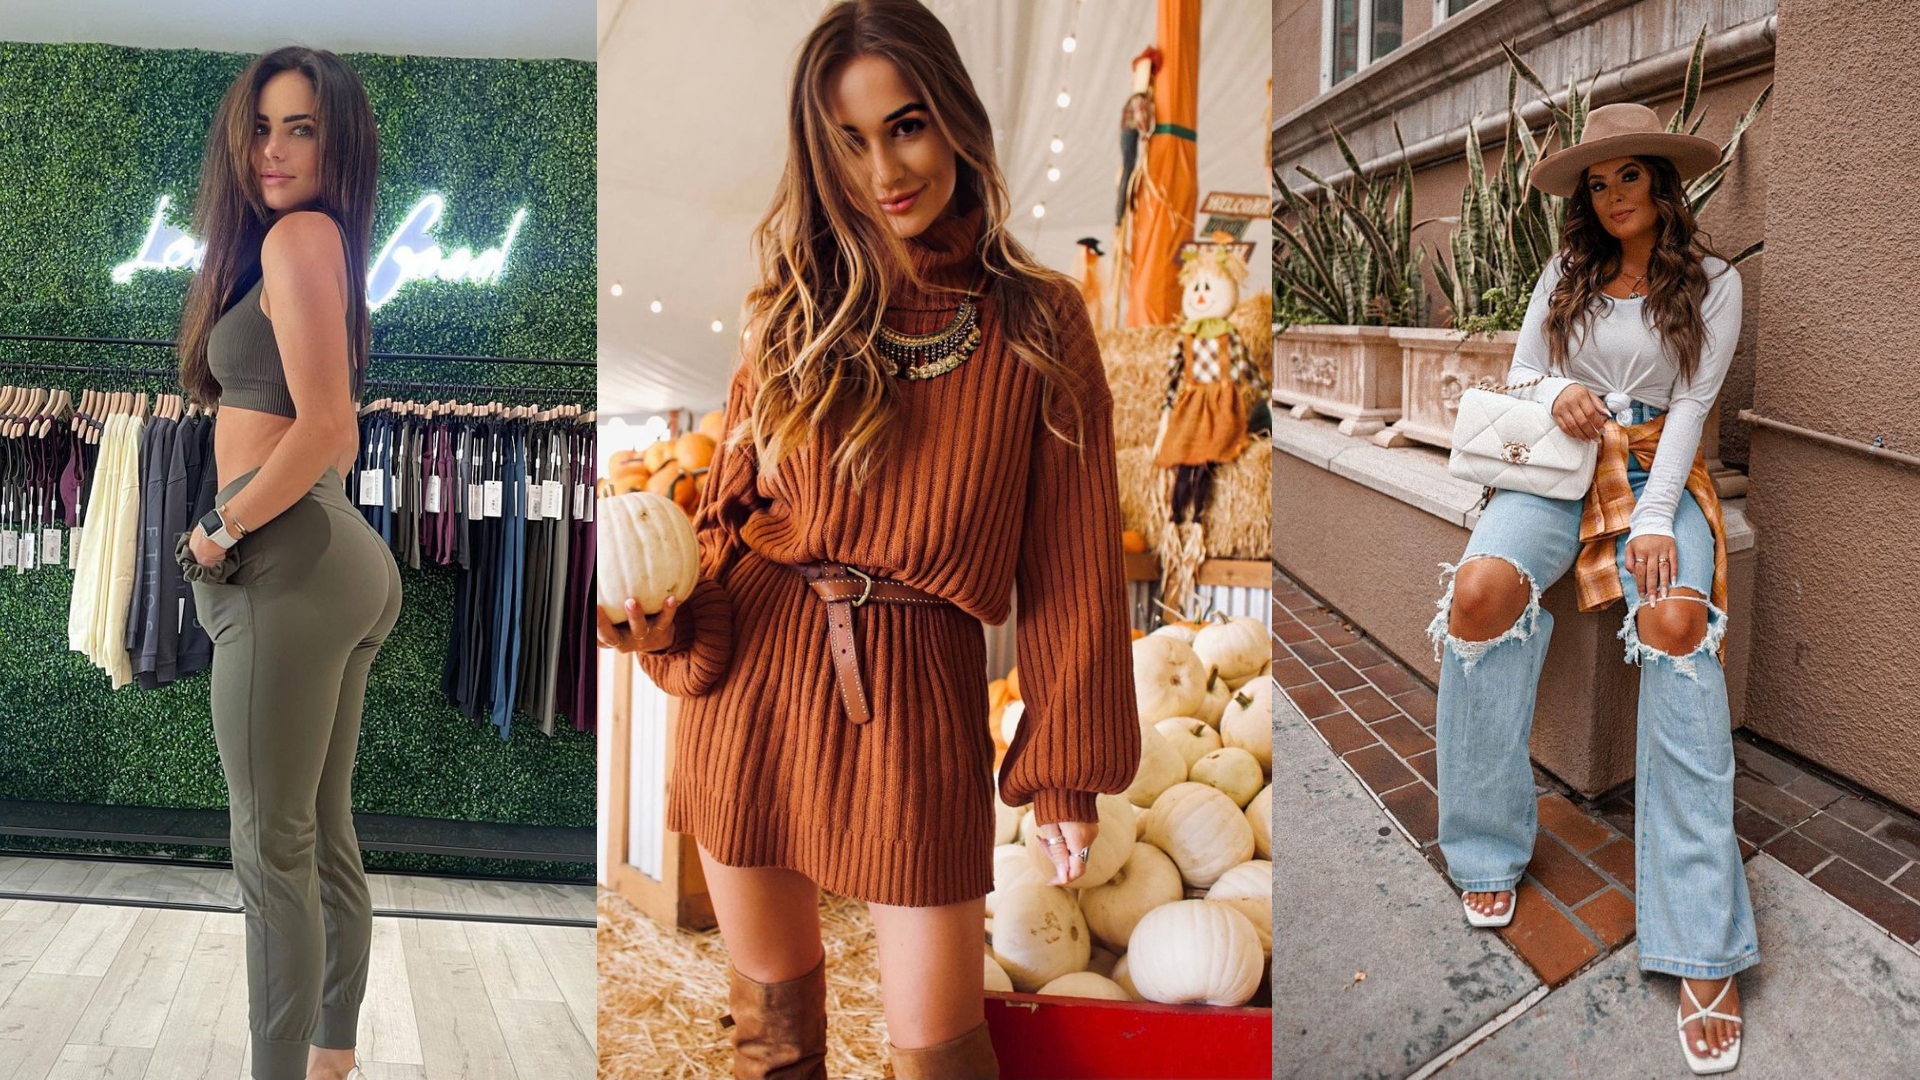 Our iTAN Influencer’s Best Fall Fashion Advice